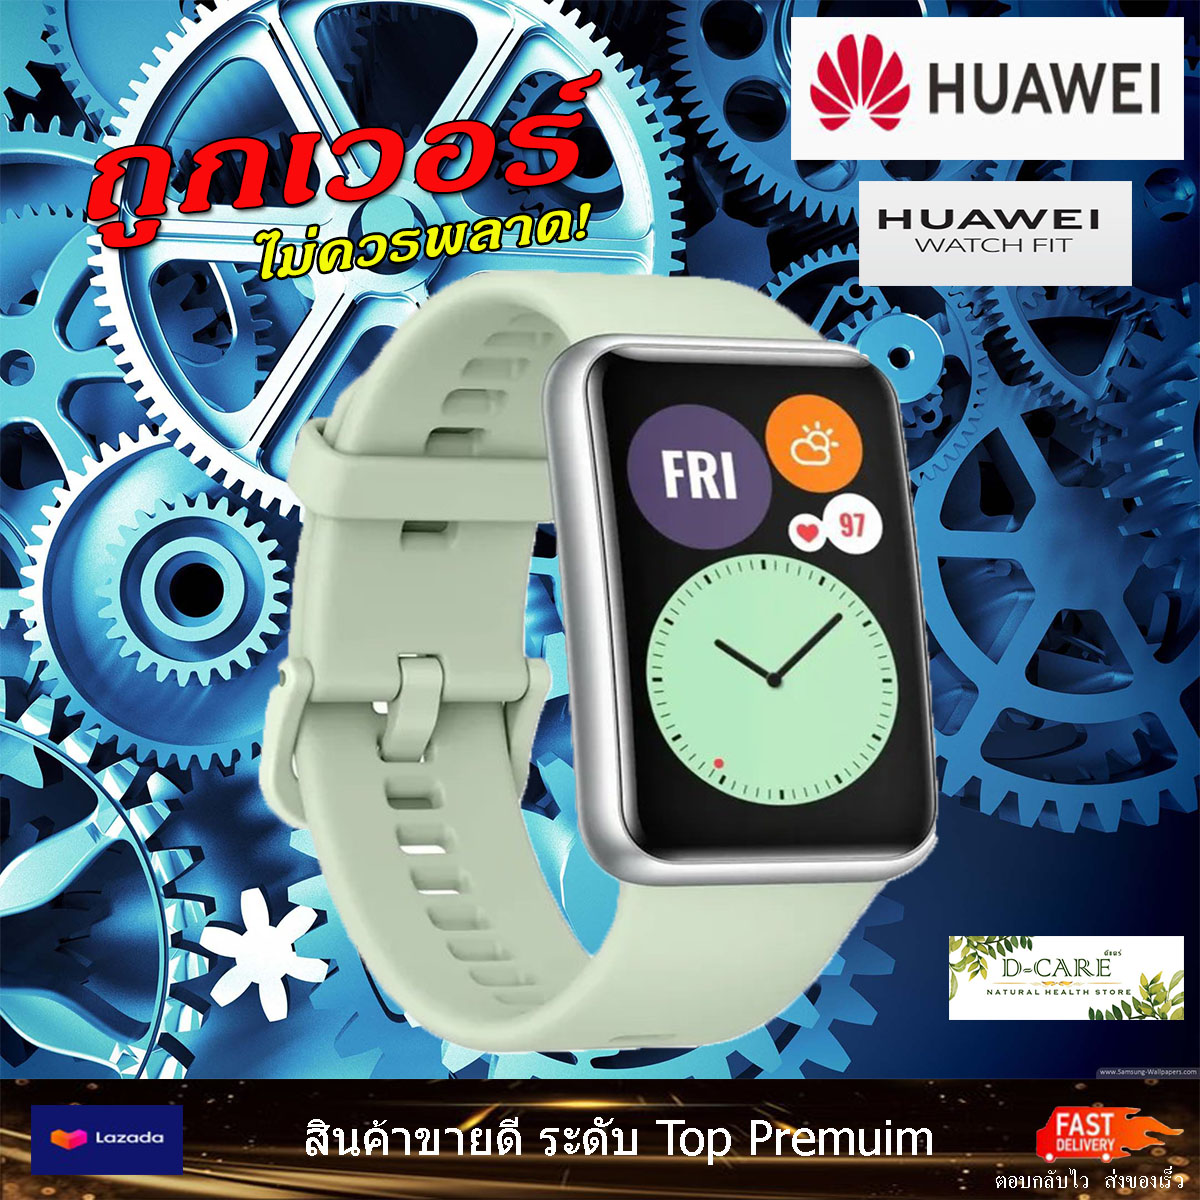 HUAWEI WATCH FIT หน้าจอ AMOLED 1.64